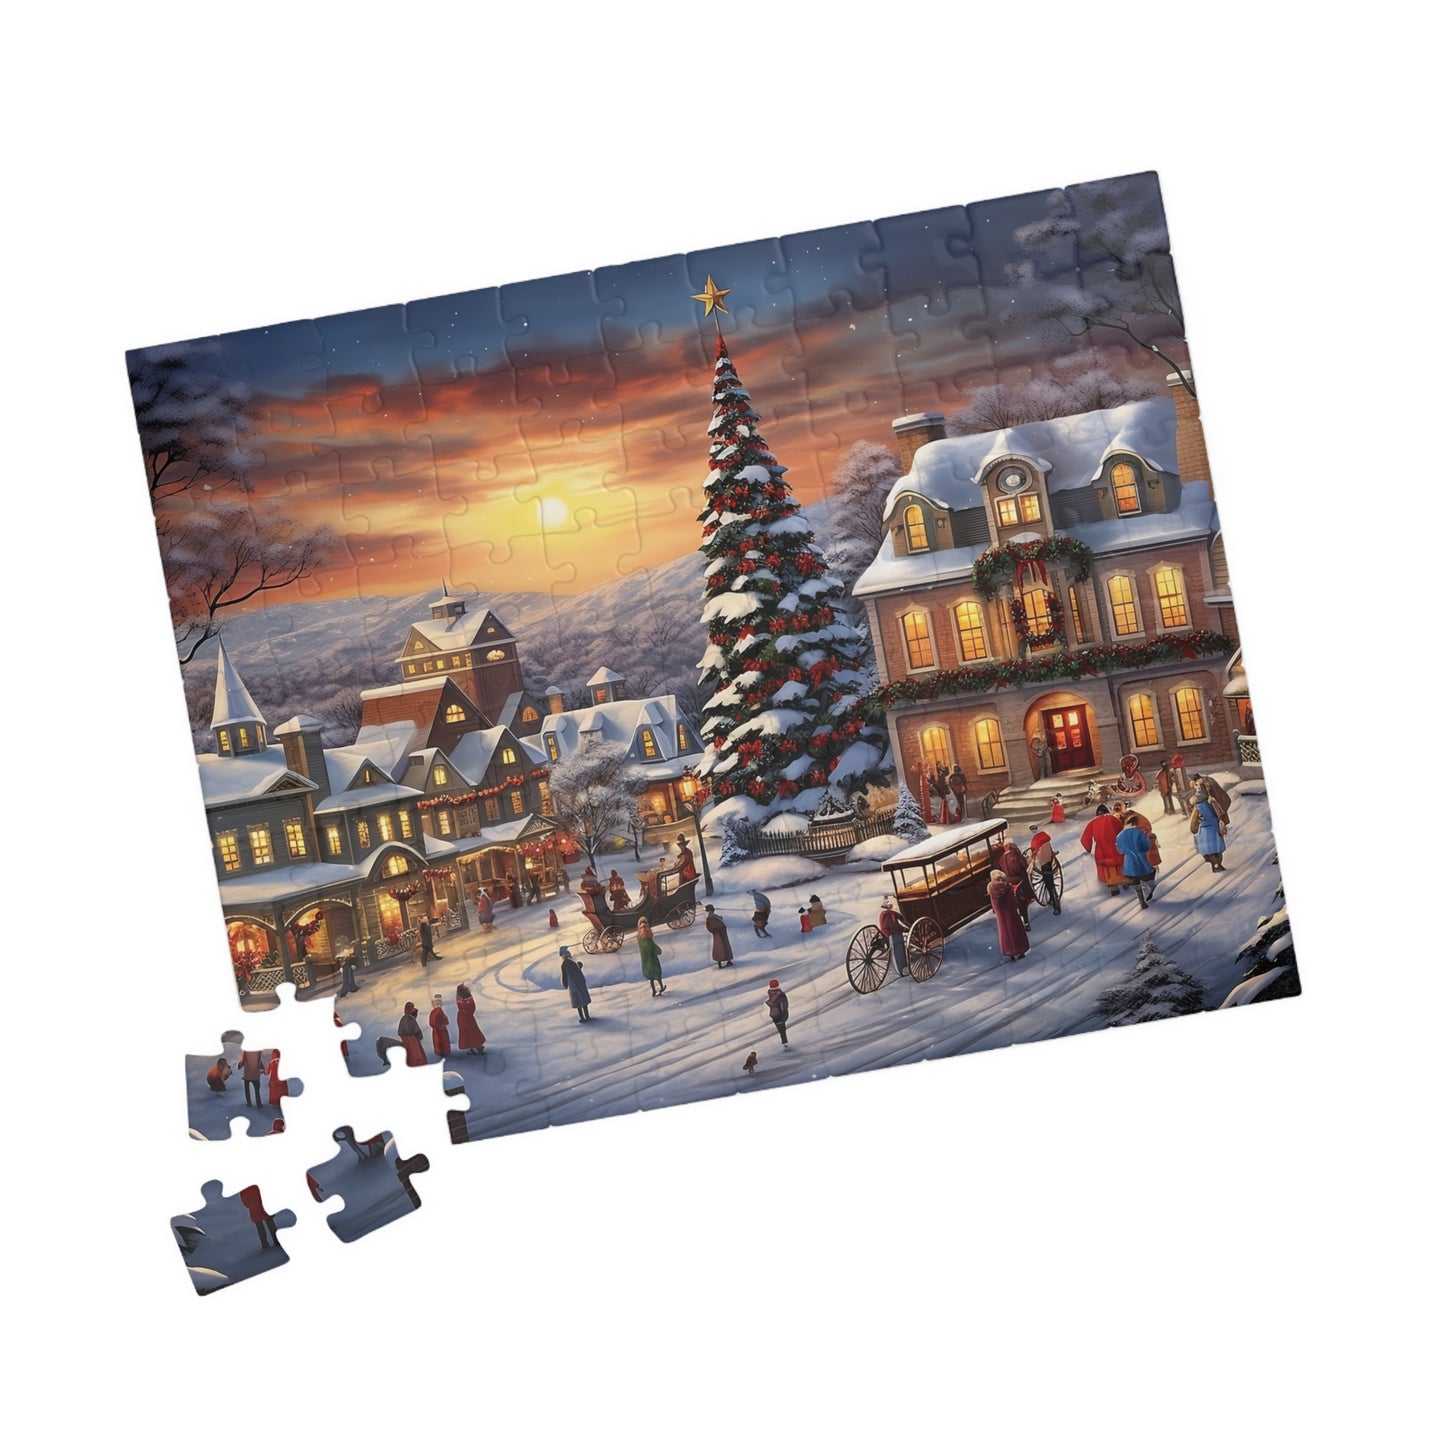 Colonial Christmas Village Jigsaw Puzzle for Adults and Kids, Perfect Holiday Gift (110 Pieces)